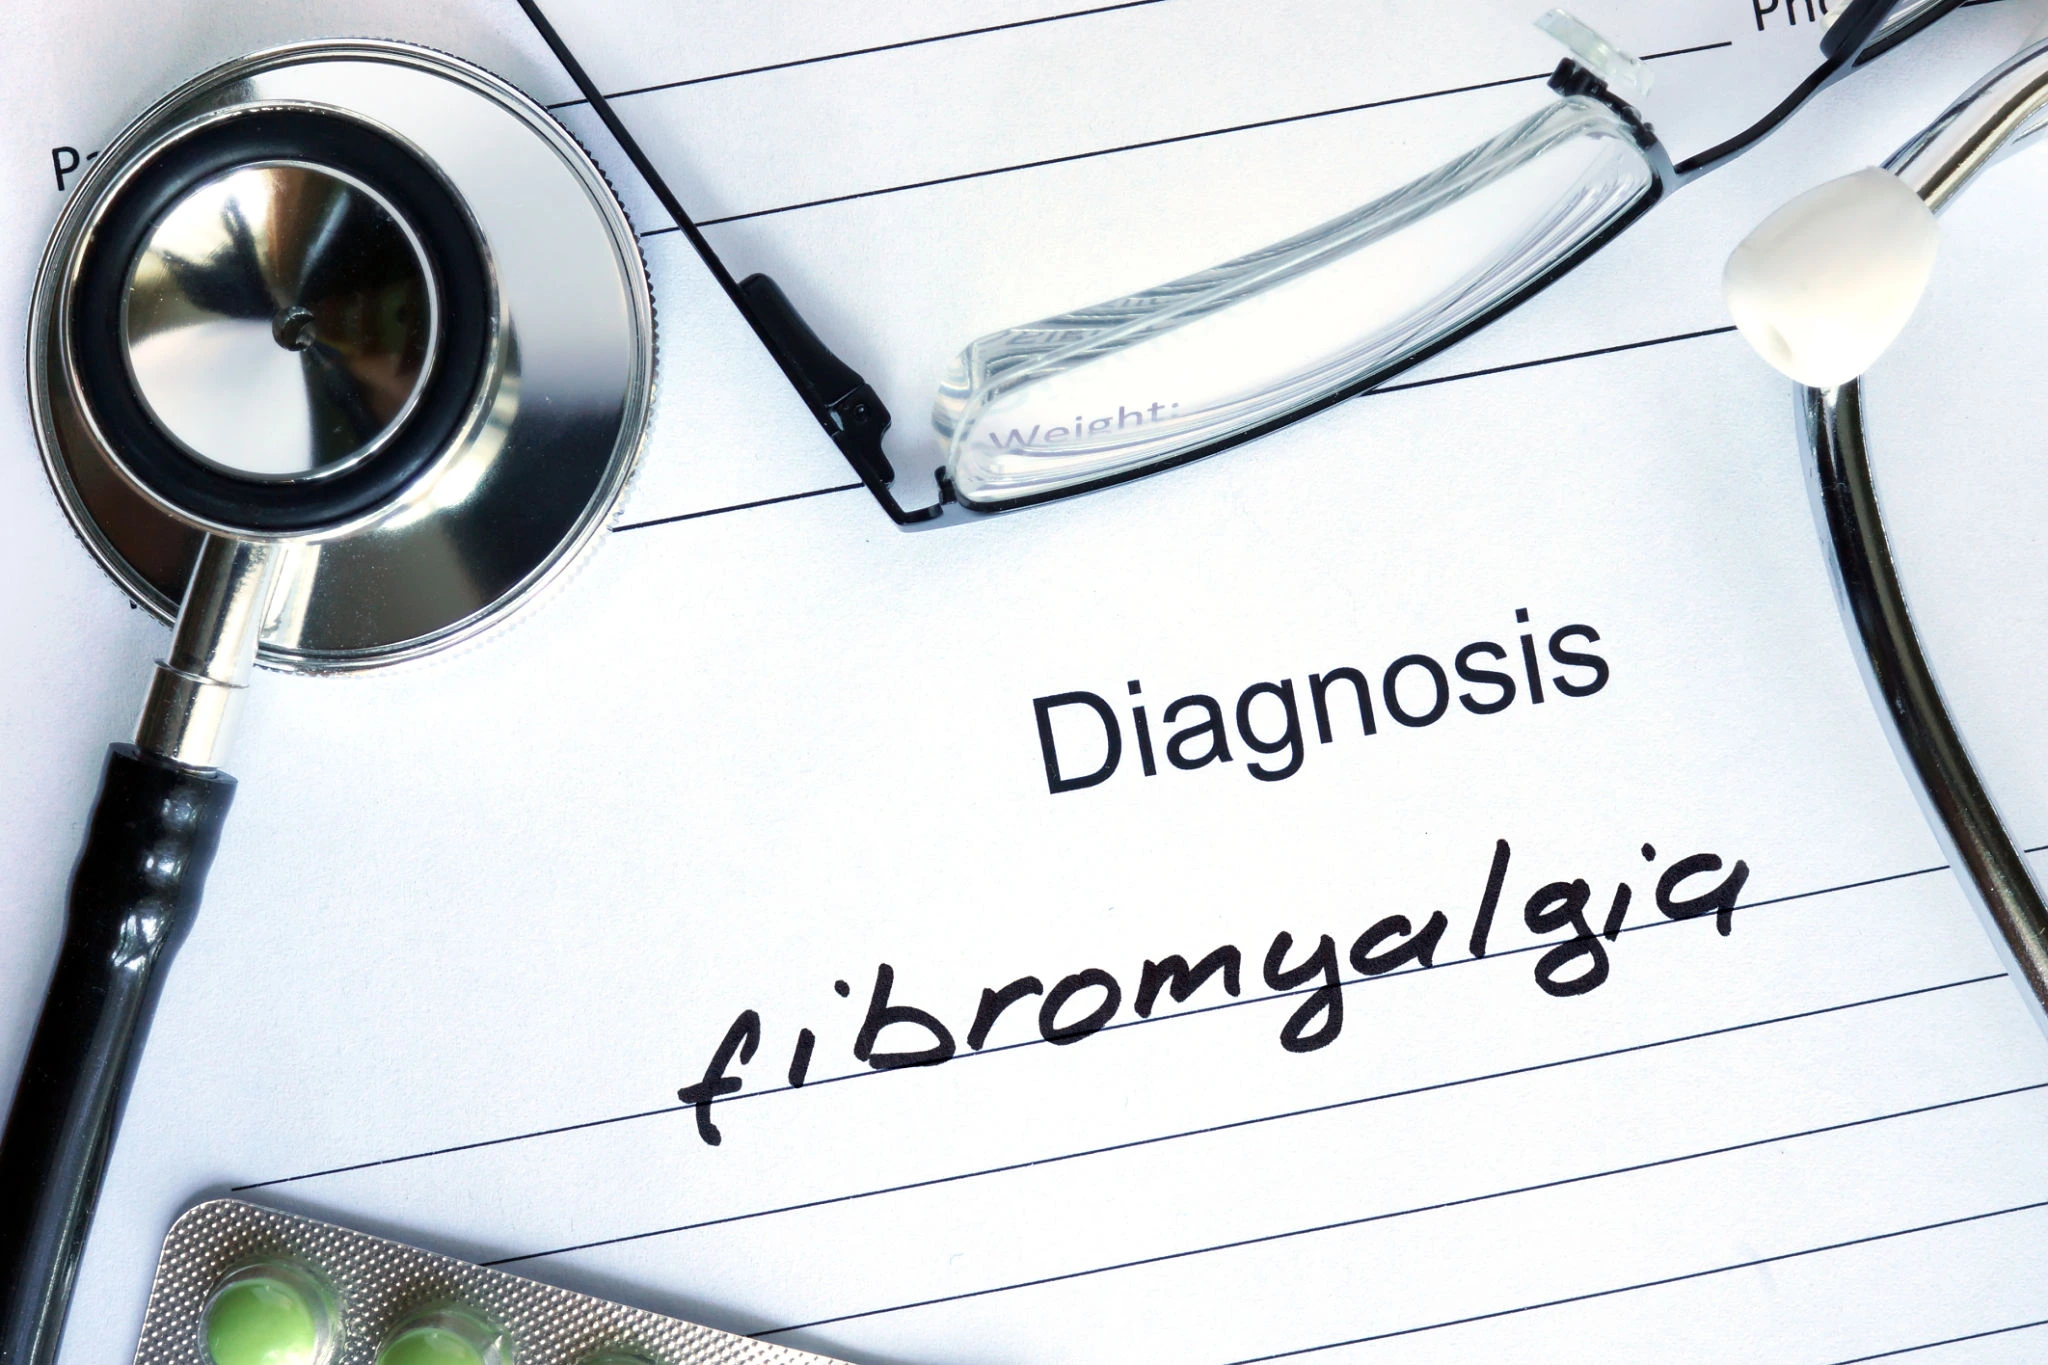 Fibromyalgia-Diagnosis-the-Complete-Guide-to-Getting-the-Right-One-and-Avoiding-the-Wrong-Ones